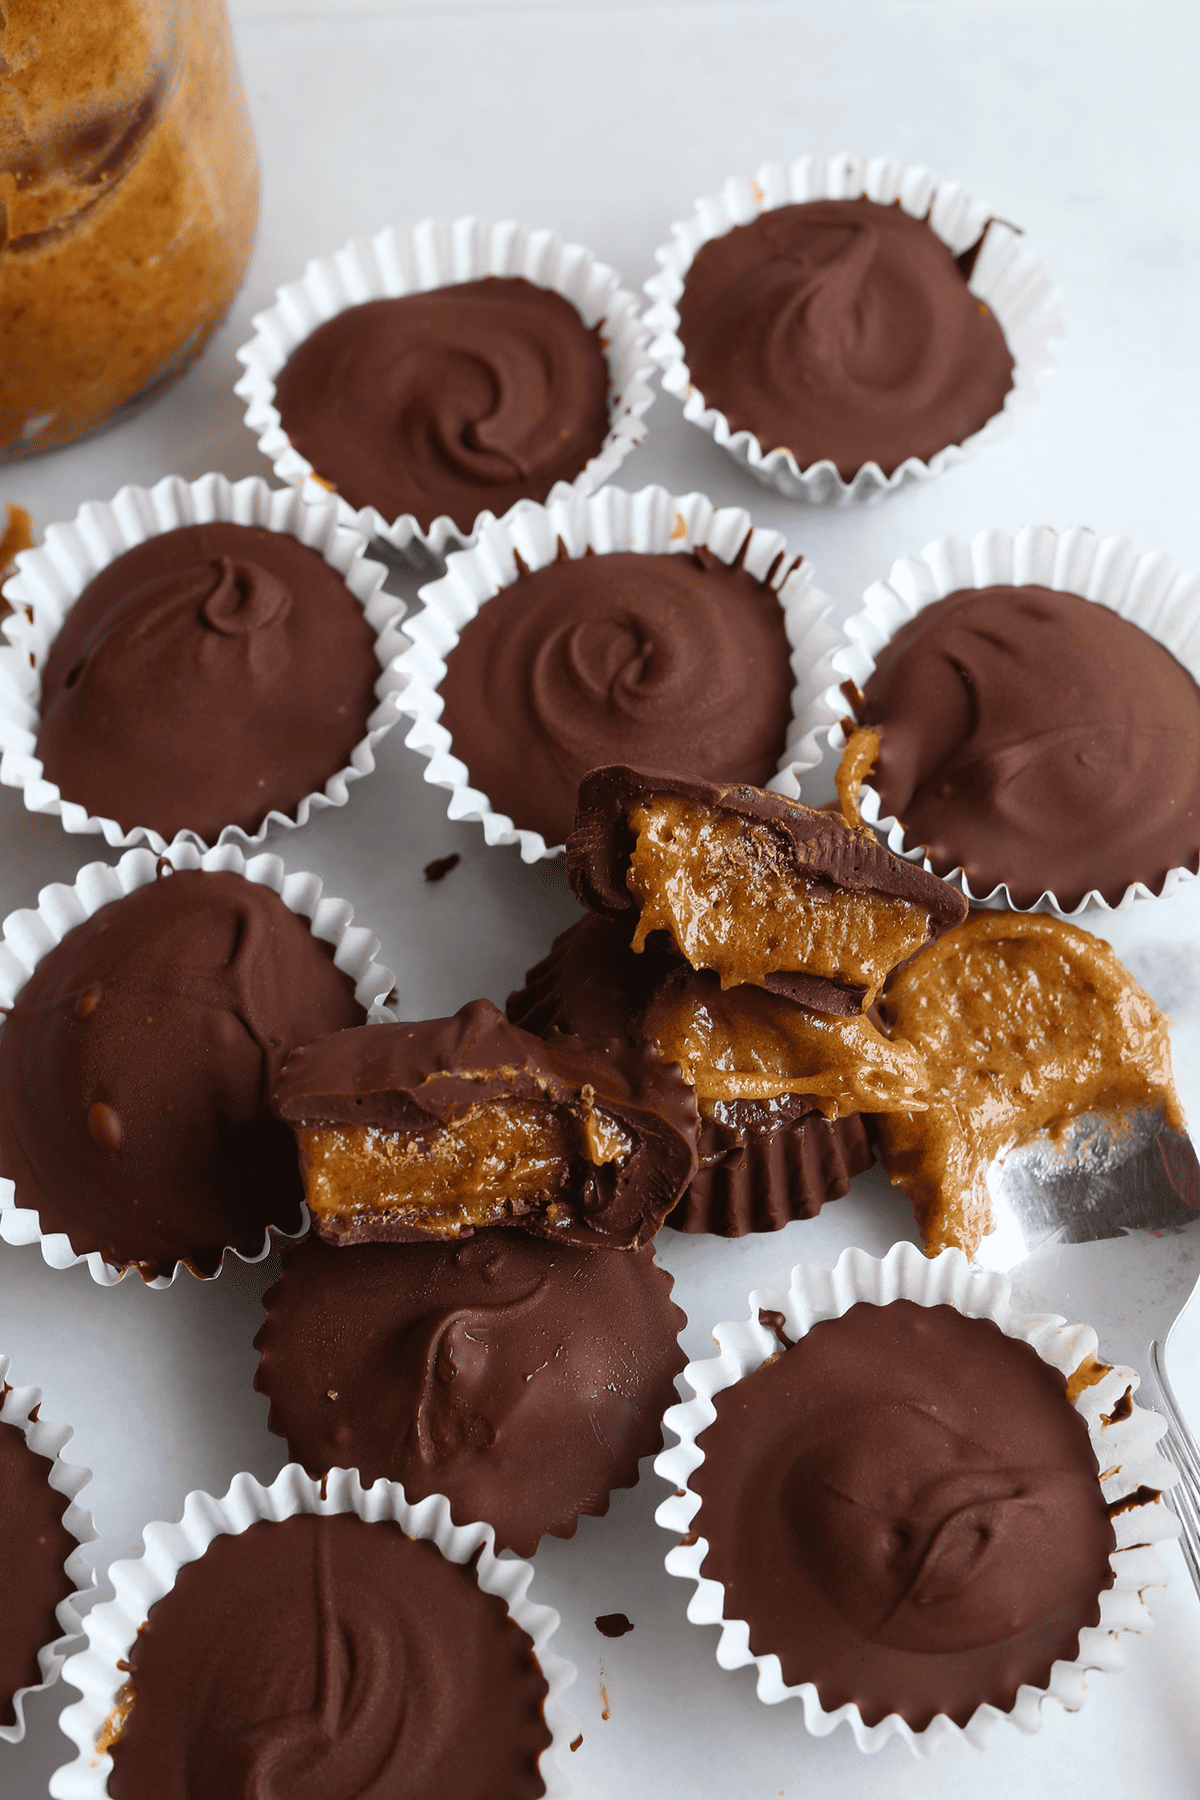 Super quick and easy, 6 ingredient vegan Chocolate Caramel Cups! No baking required for this chocolaty gooey caramel treat!!